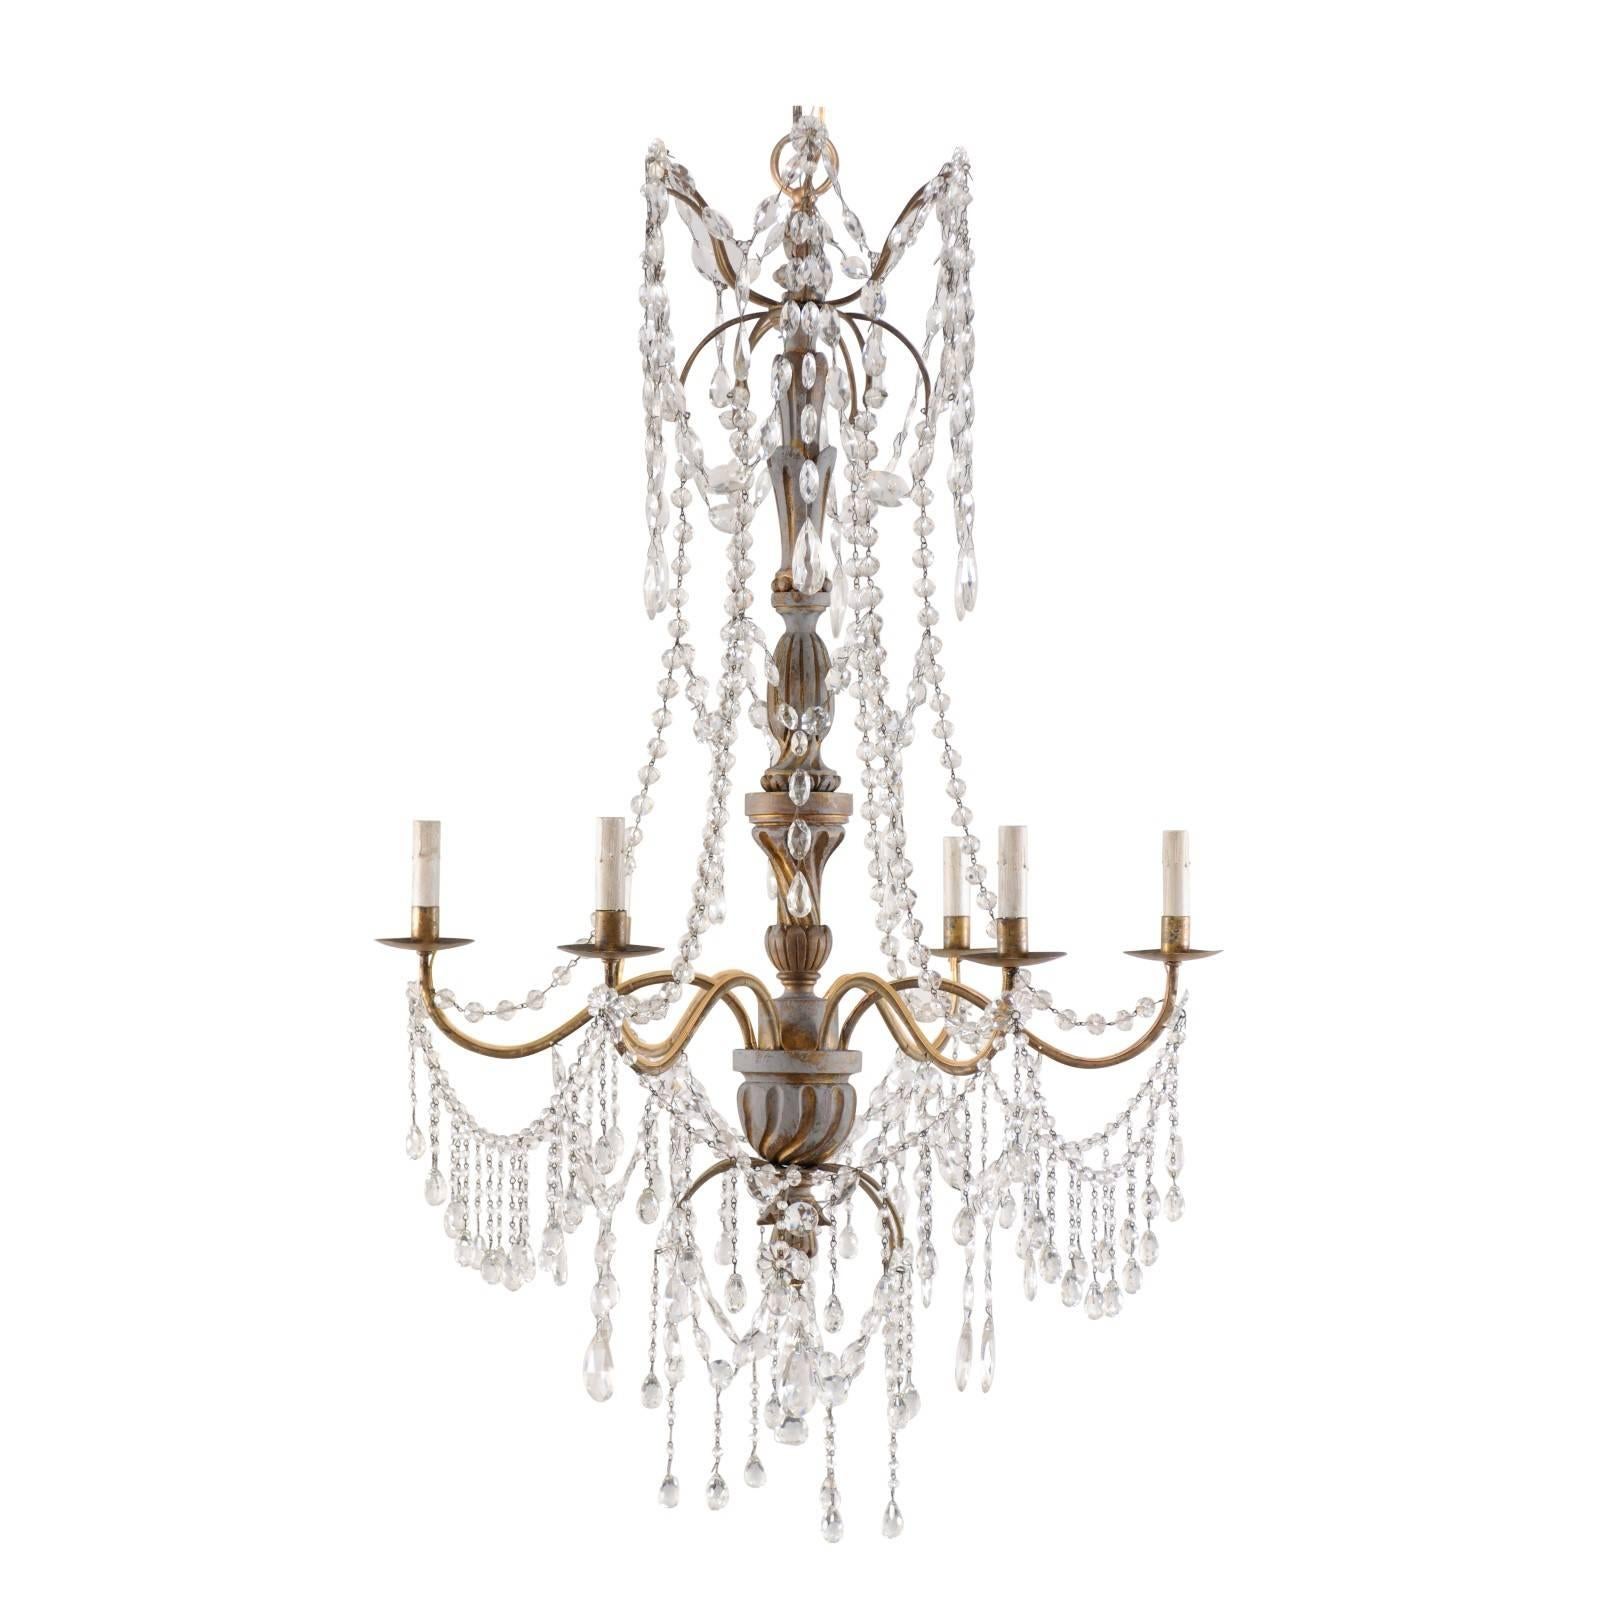 Italian Antique Crystal Six-Light Chandelier, Painted with Gilt Accents